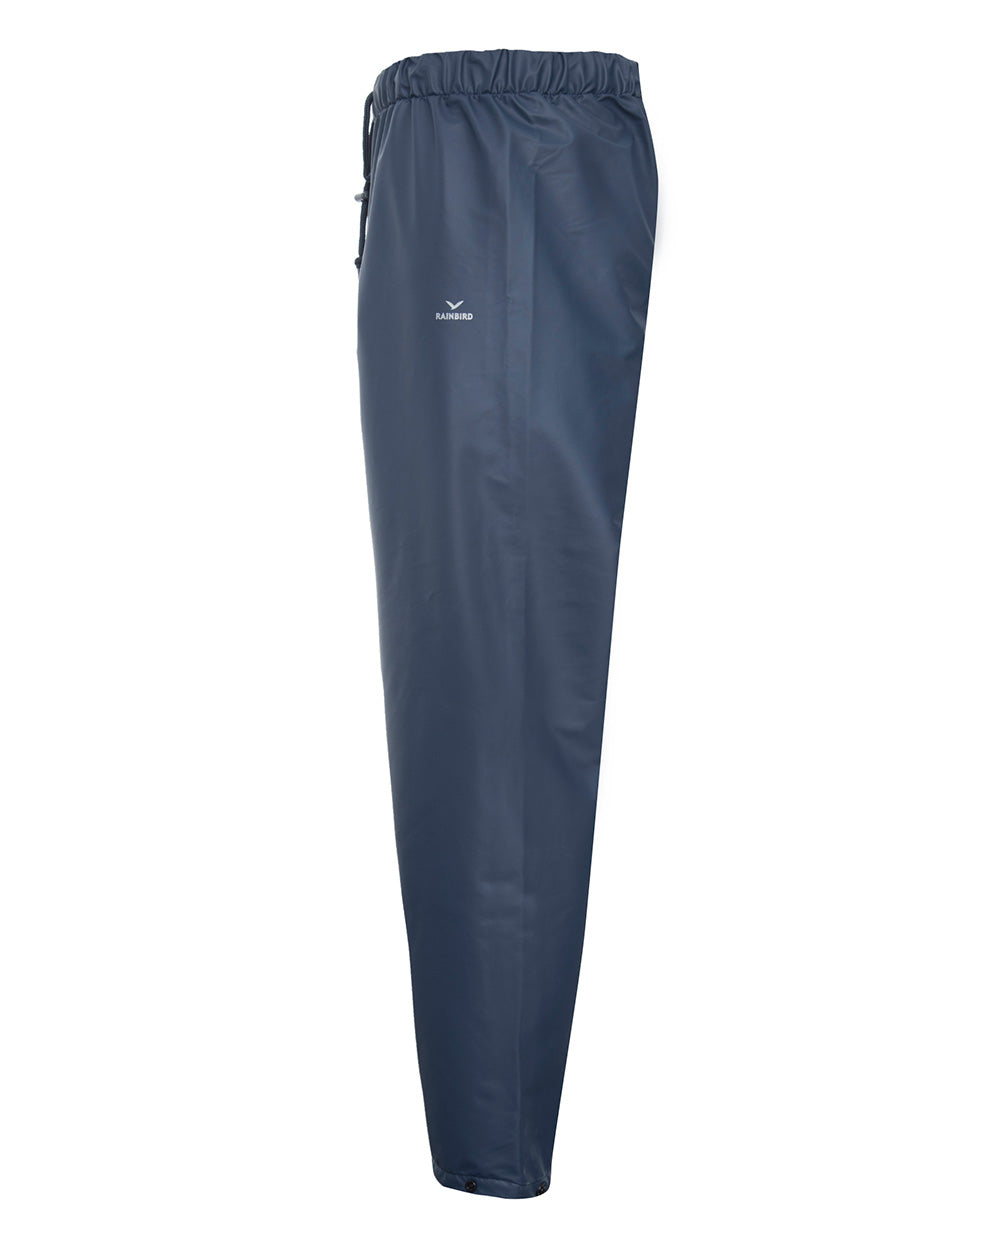 Shelter Pant in Navy